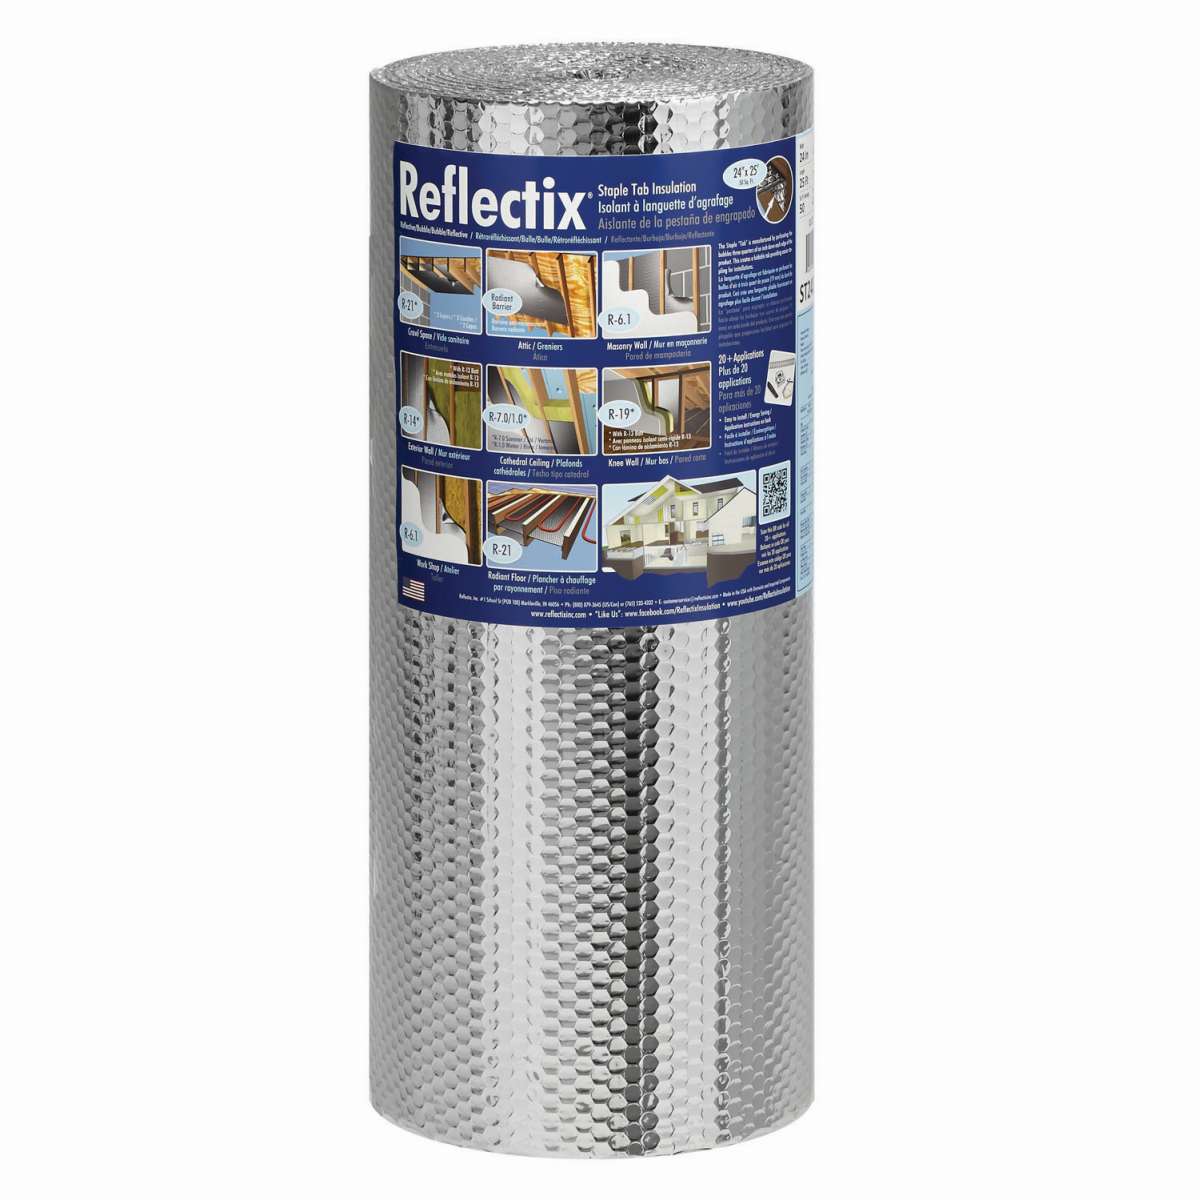 Reflectix 24 in X 25ft Staple Tab Versatile Framing Double Reflective Insulation for sale online 